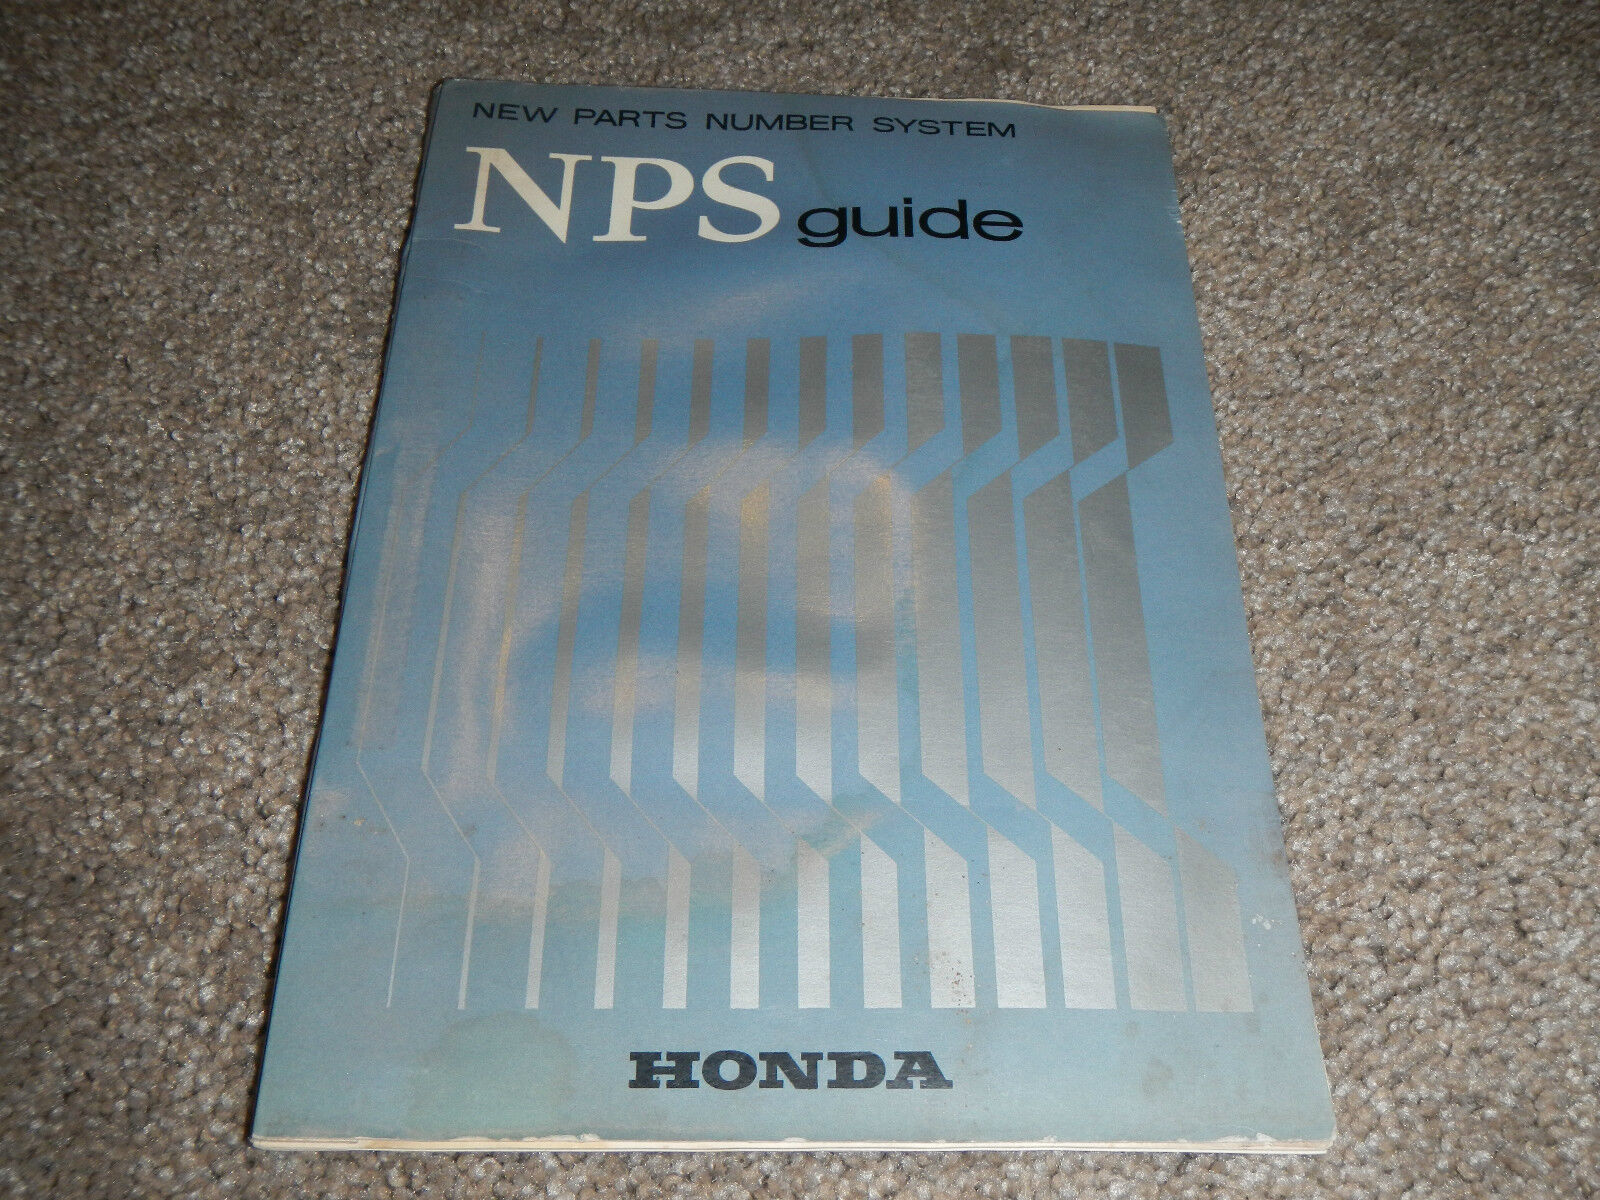 1950s 1960's HONDA NPS GUIDE NUMBER SYSTEM PARTS MANUAL BOOK CATALOG INFORMATION - $44.35